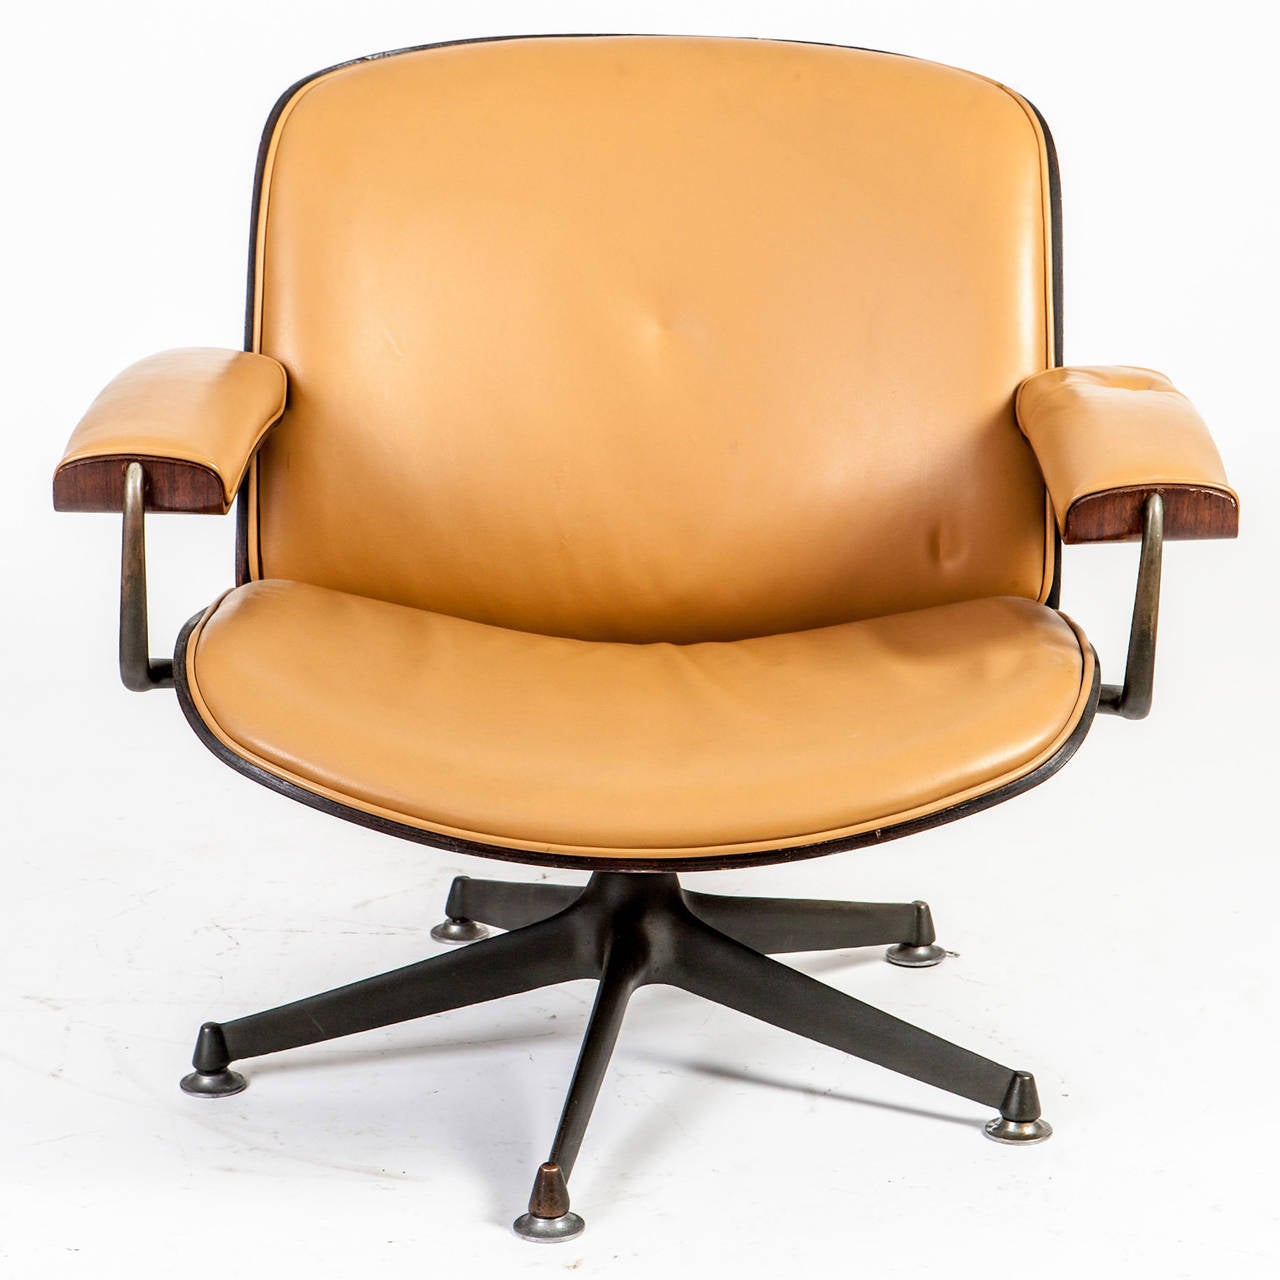 Beautiful and comfortable Italian Midcentury lounge chair designed by Ico Parisi for MIM Roma in the 1950s. It features a Rosewood veneered seating shell and a renewed cognac leather upholstery on a five star Iron base.
Perfect highlight for any